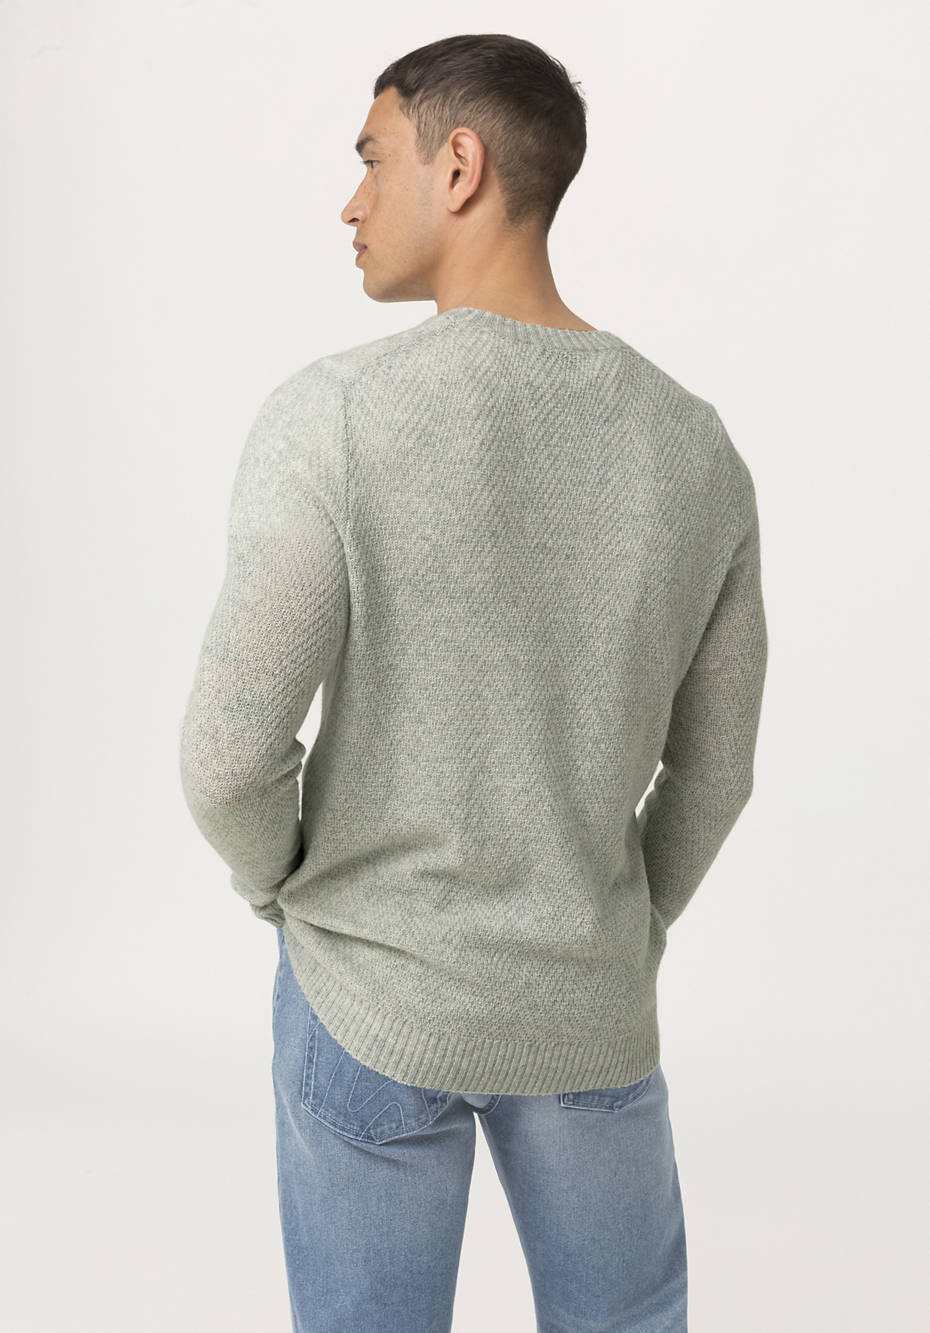 Virgin wool sweater with yak and cotton